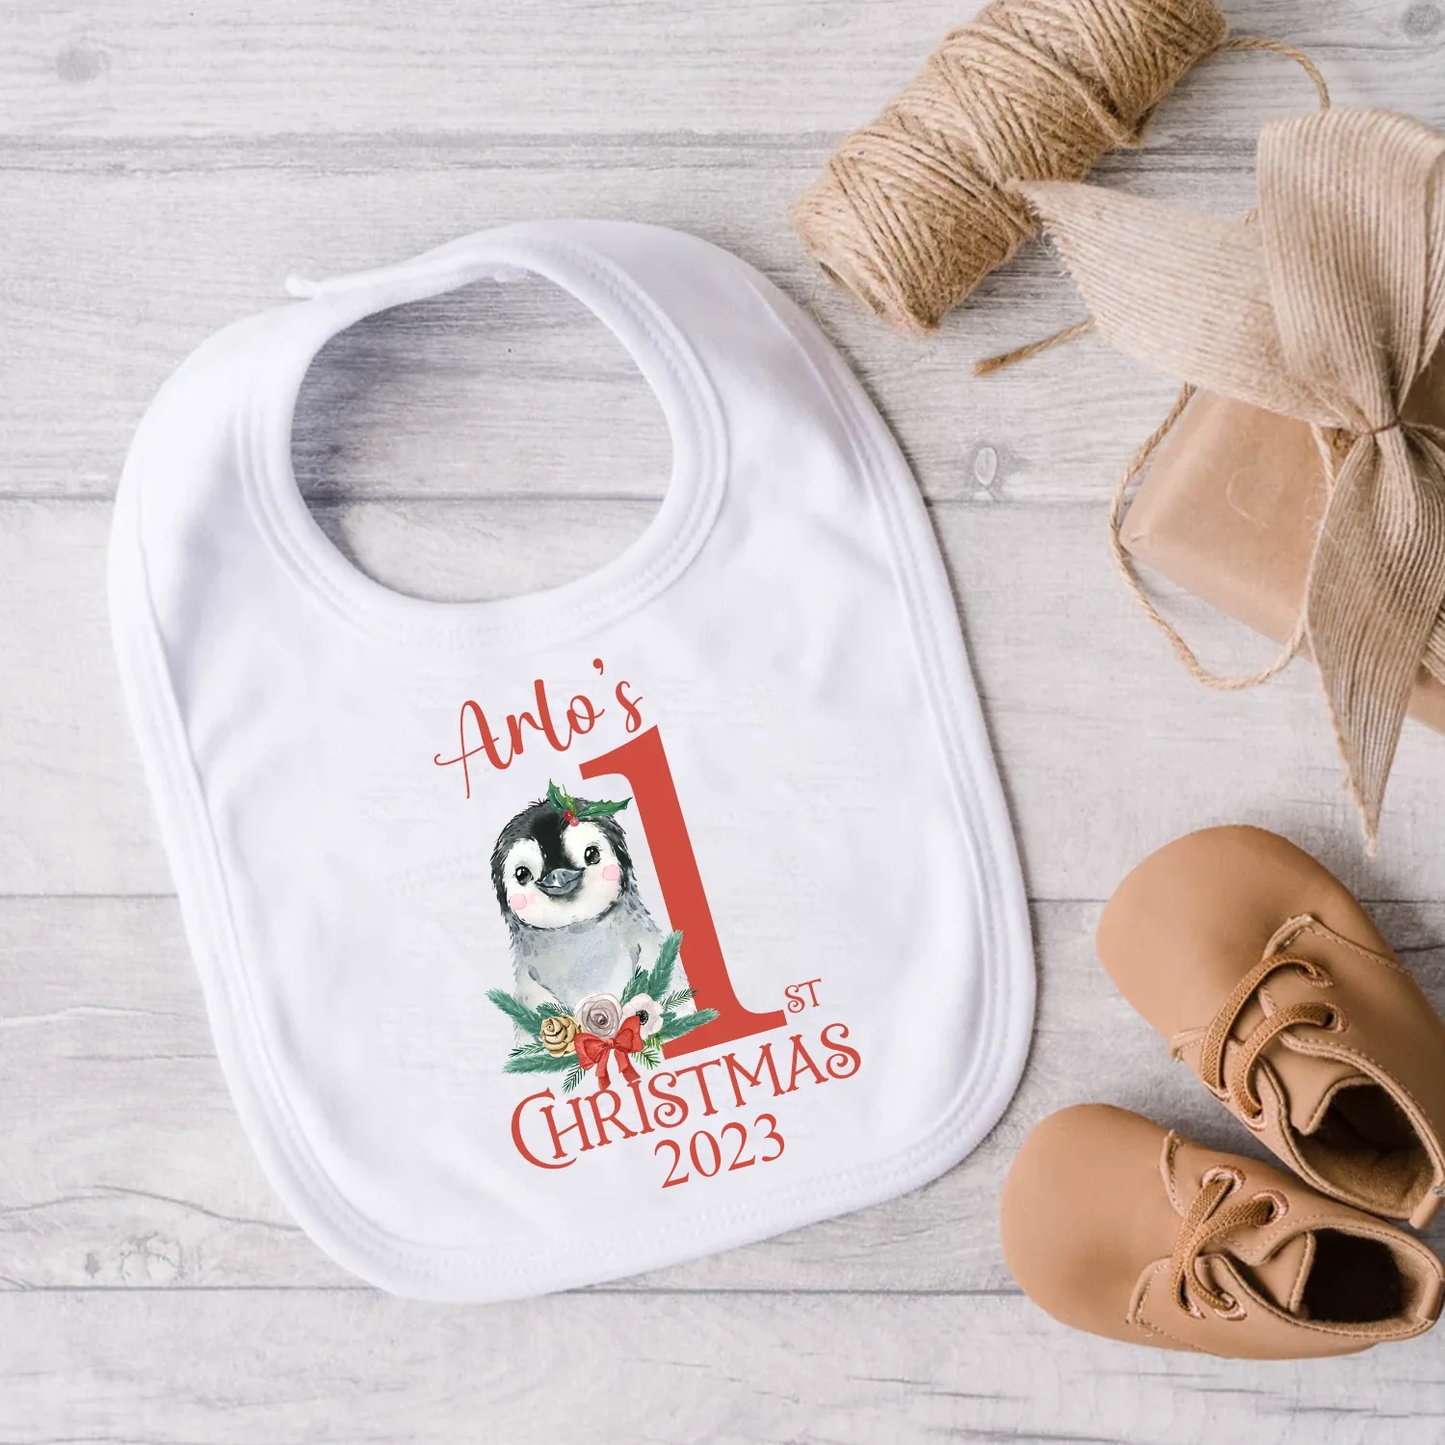 My 1st Christmas- Personalised Penguin Design Baby Vest